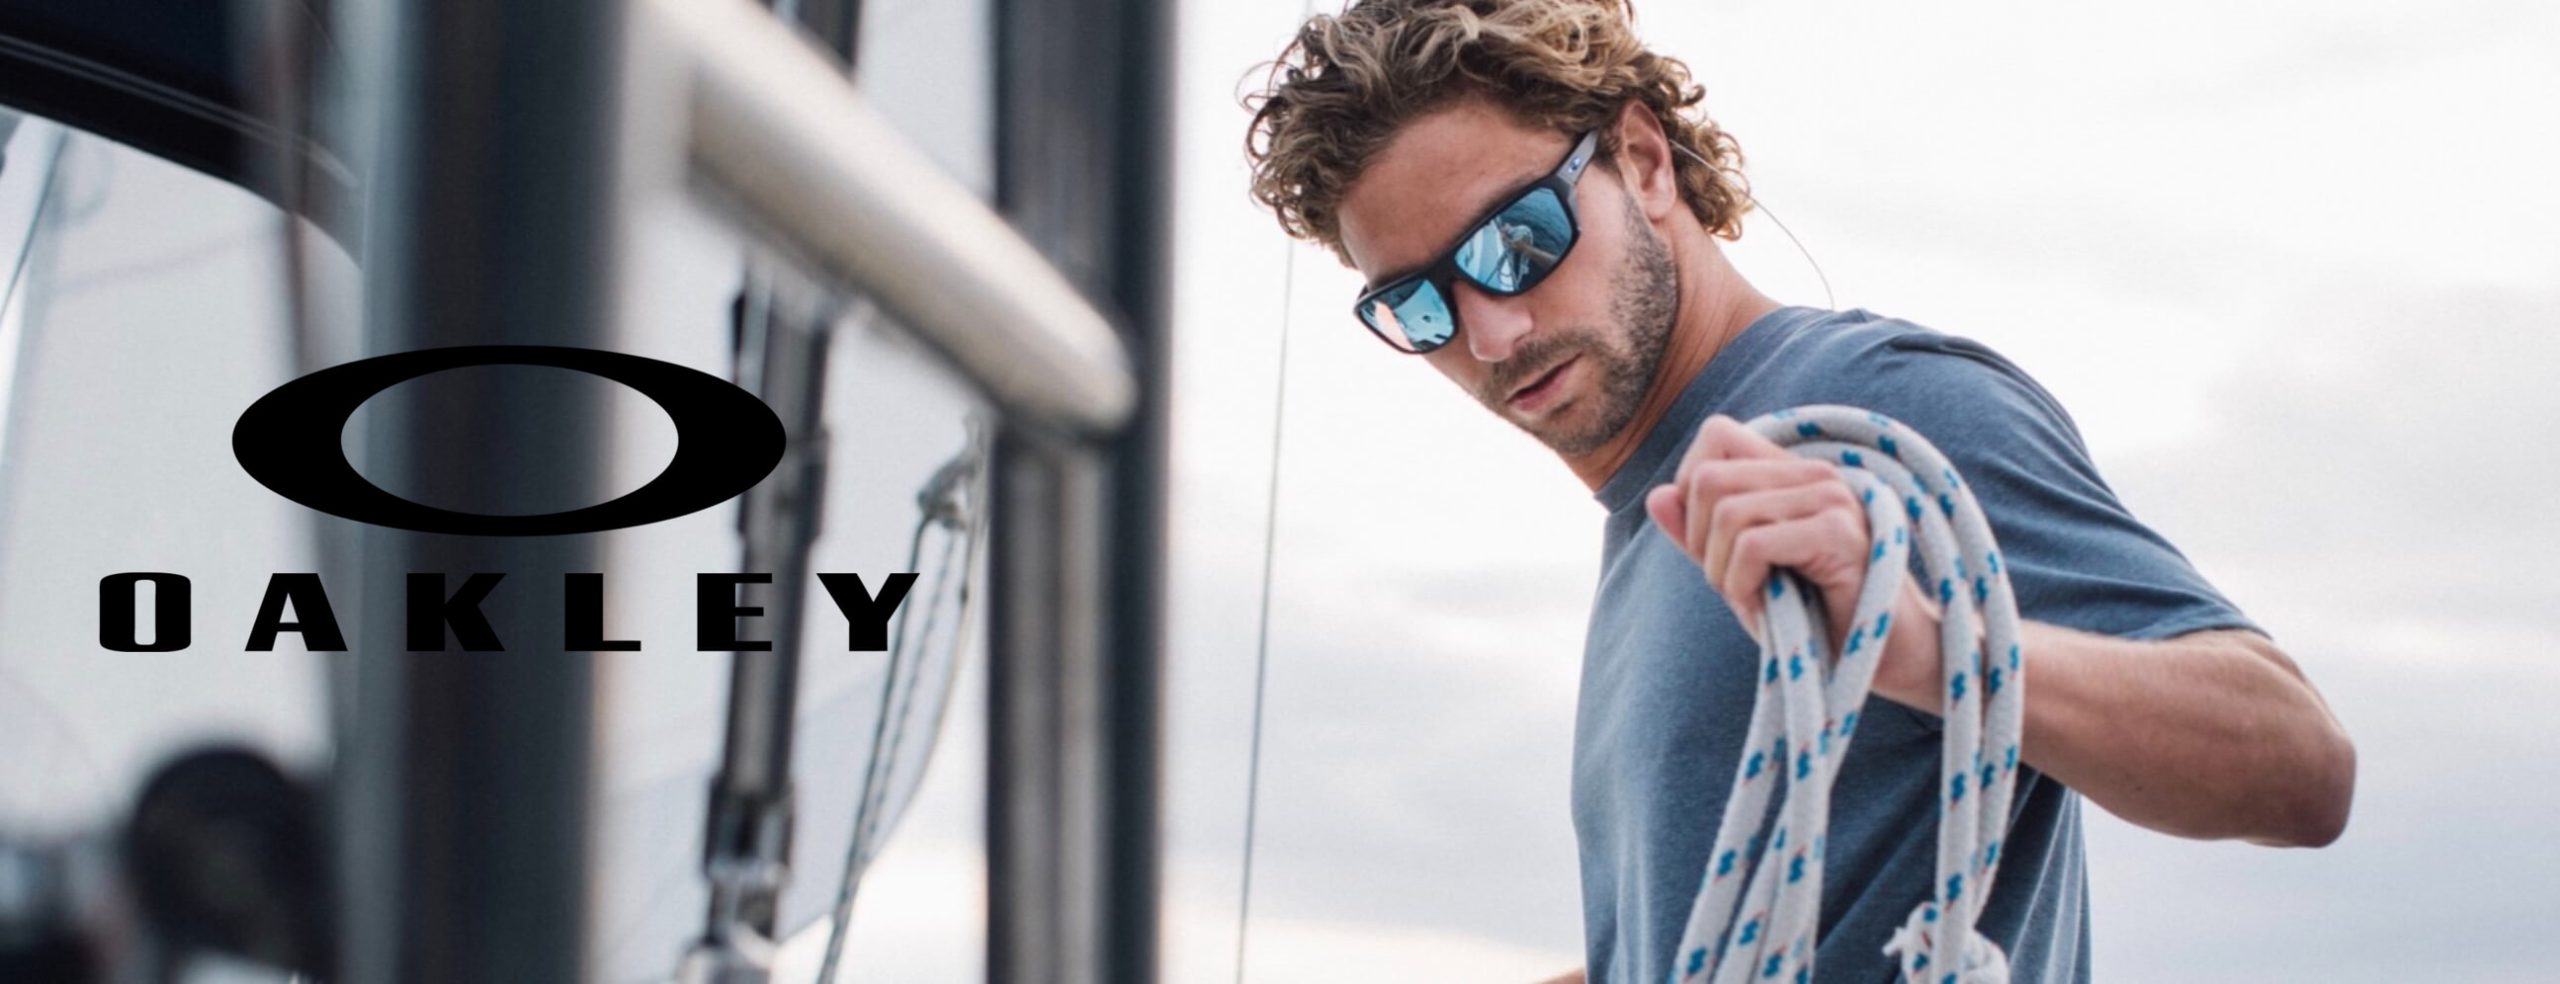 Enjoy The Summer Sunshine, Discount Oakley Sunglasses Are Waiting For You To Wear